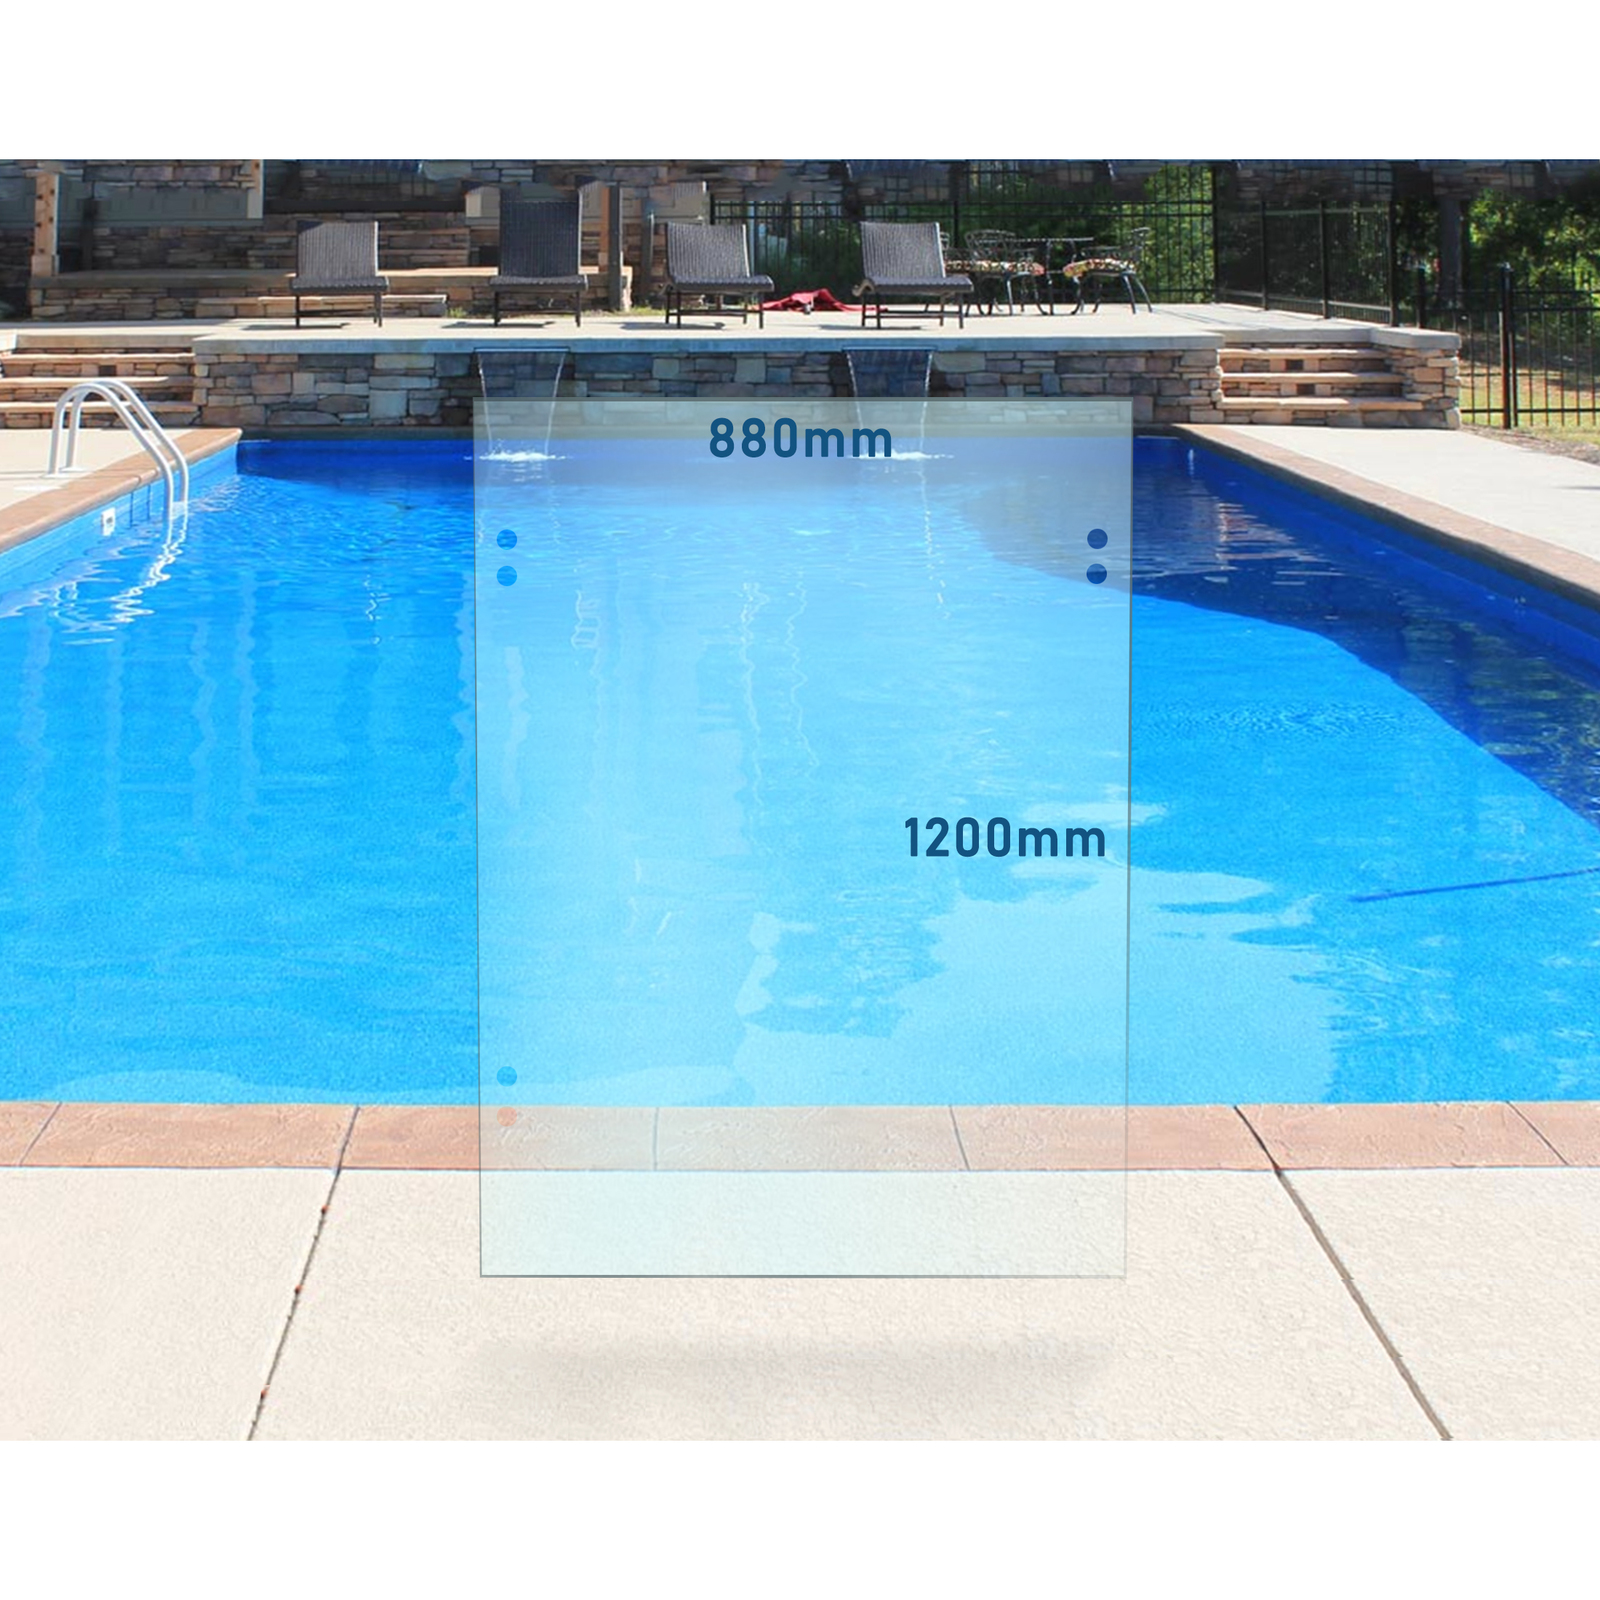 Gate Panel - 880mm x 1200mm - 10mm Glass Pool Fencing Panel